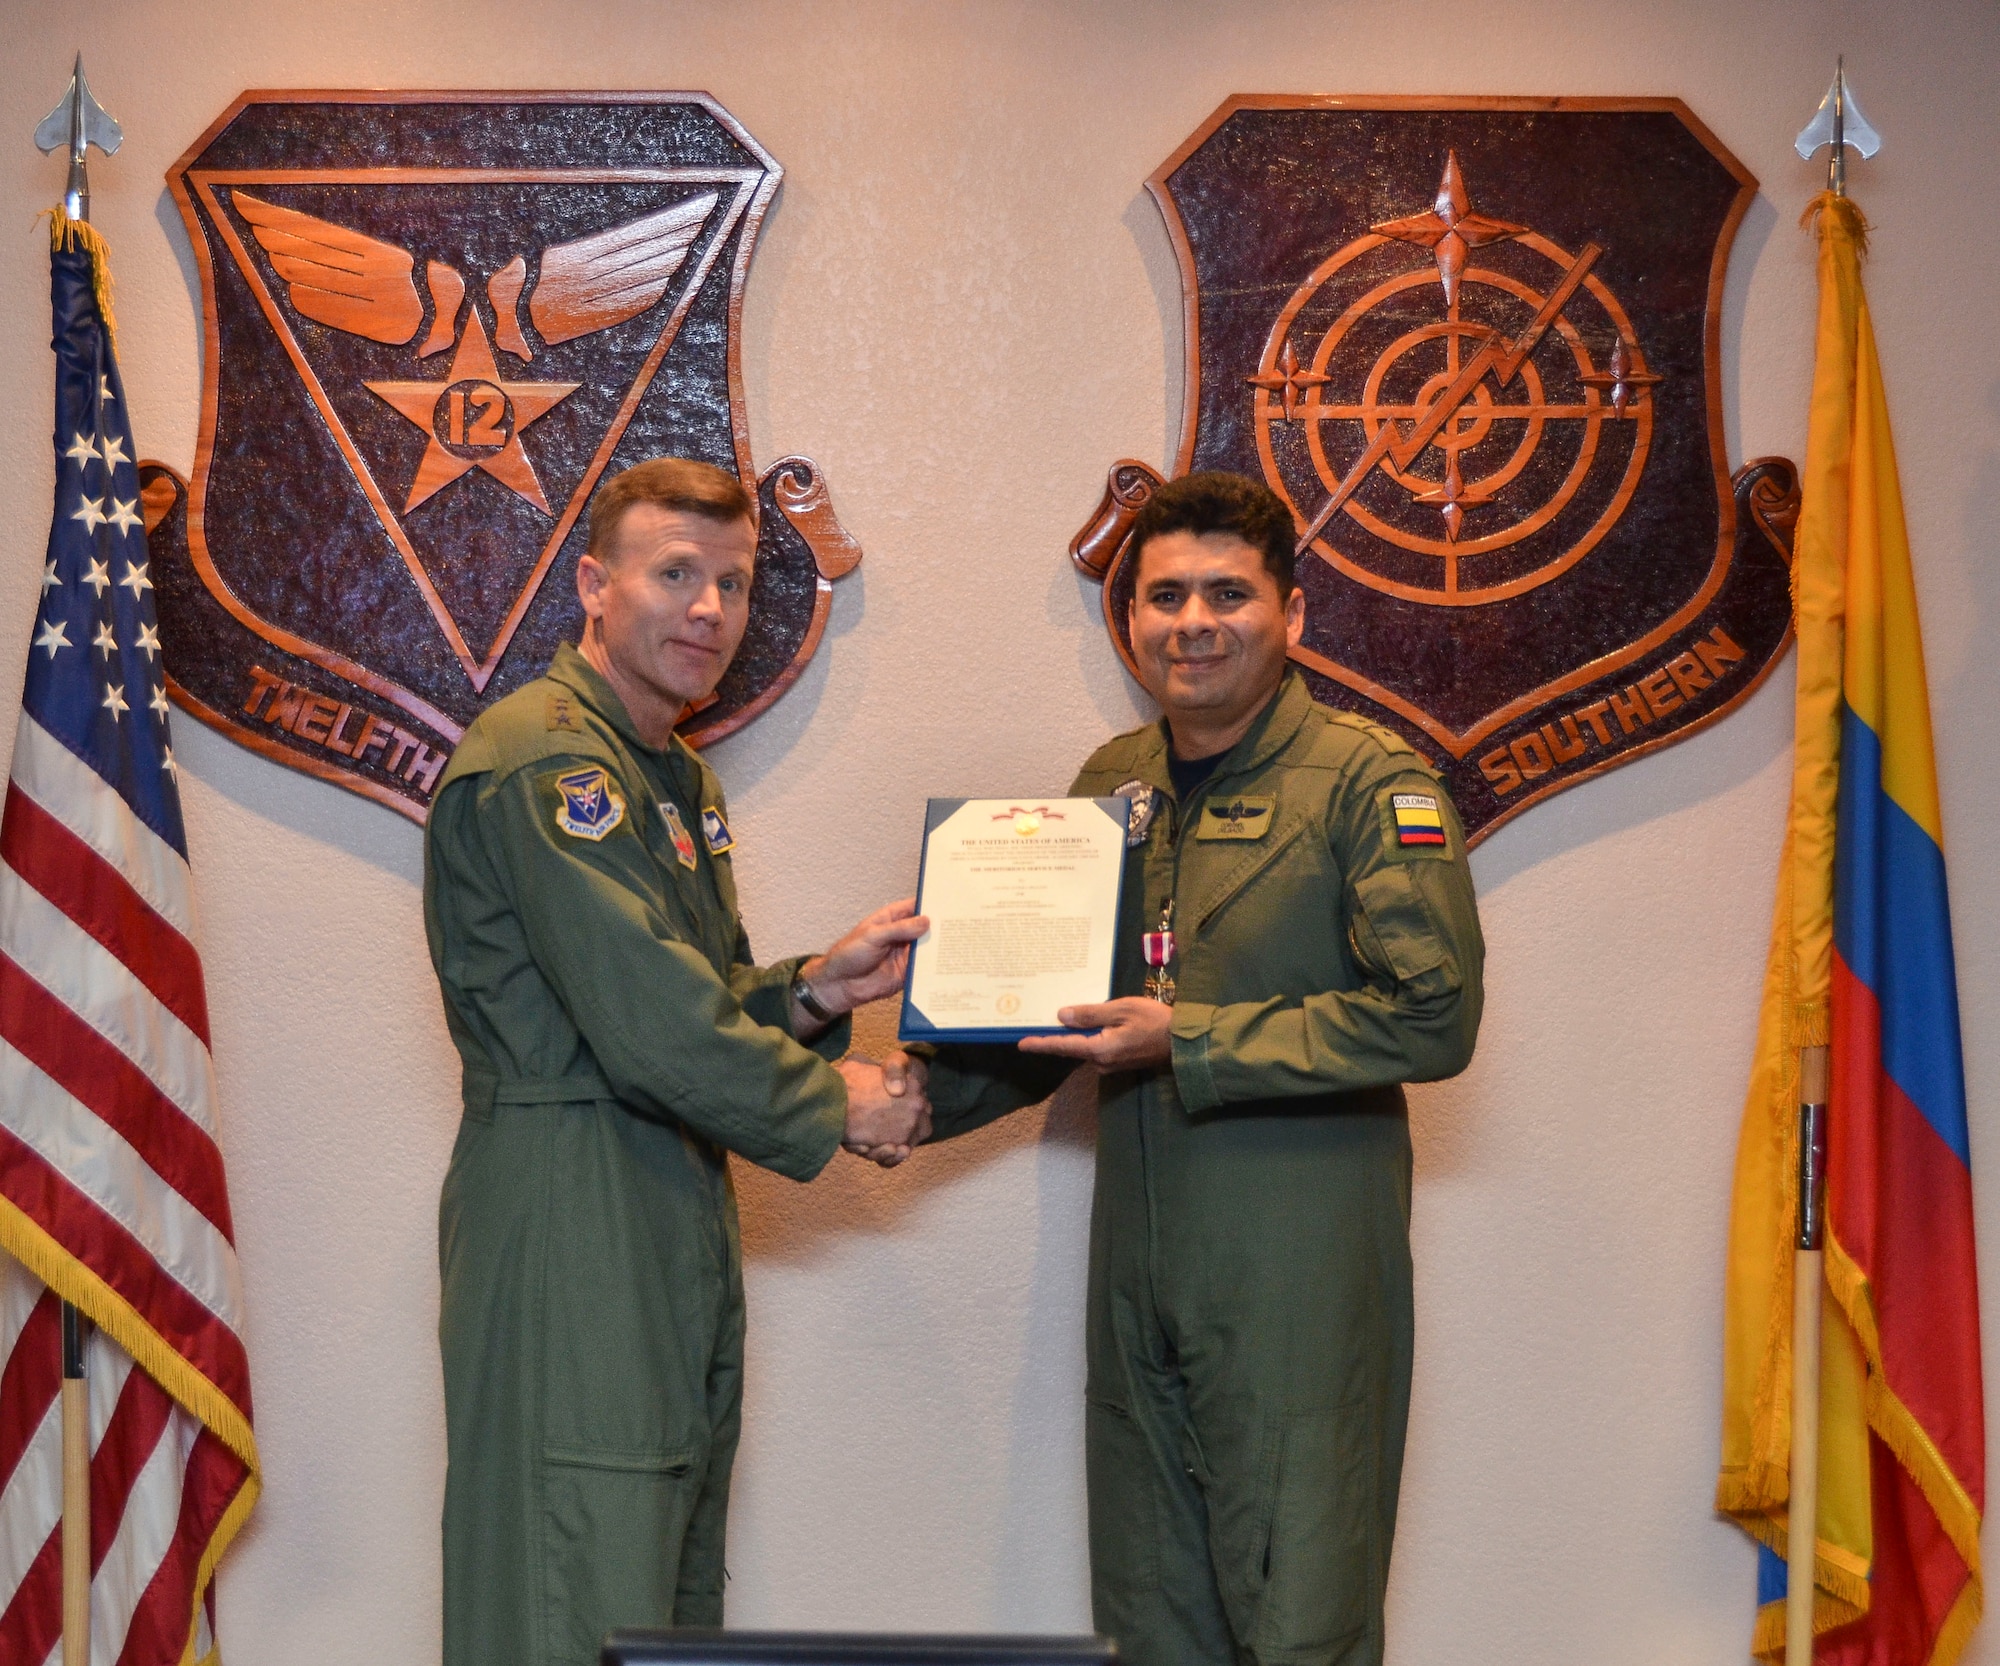 Col. Javier I. Delgado, 12th AF (AFSOUTH) Colombian liaison officer, earned the Meritorious Service Medal for his outstanding service to the United States as Colombian liaison officer. His leadership was vital in the joining of forces between his nation’s air force and the United States Air Force to synchronize efforts in countering transitional organized crime in Central America.